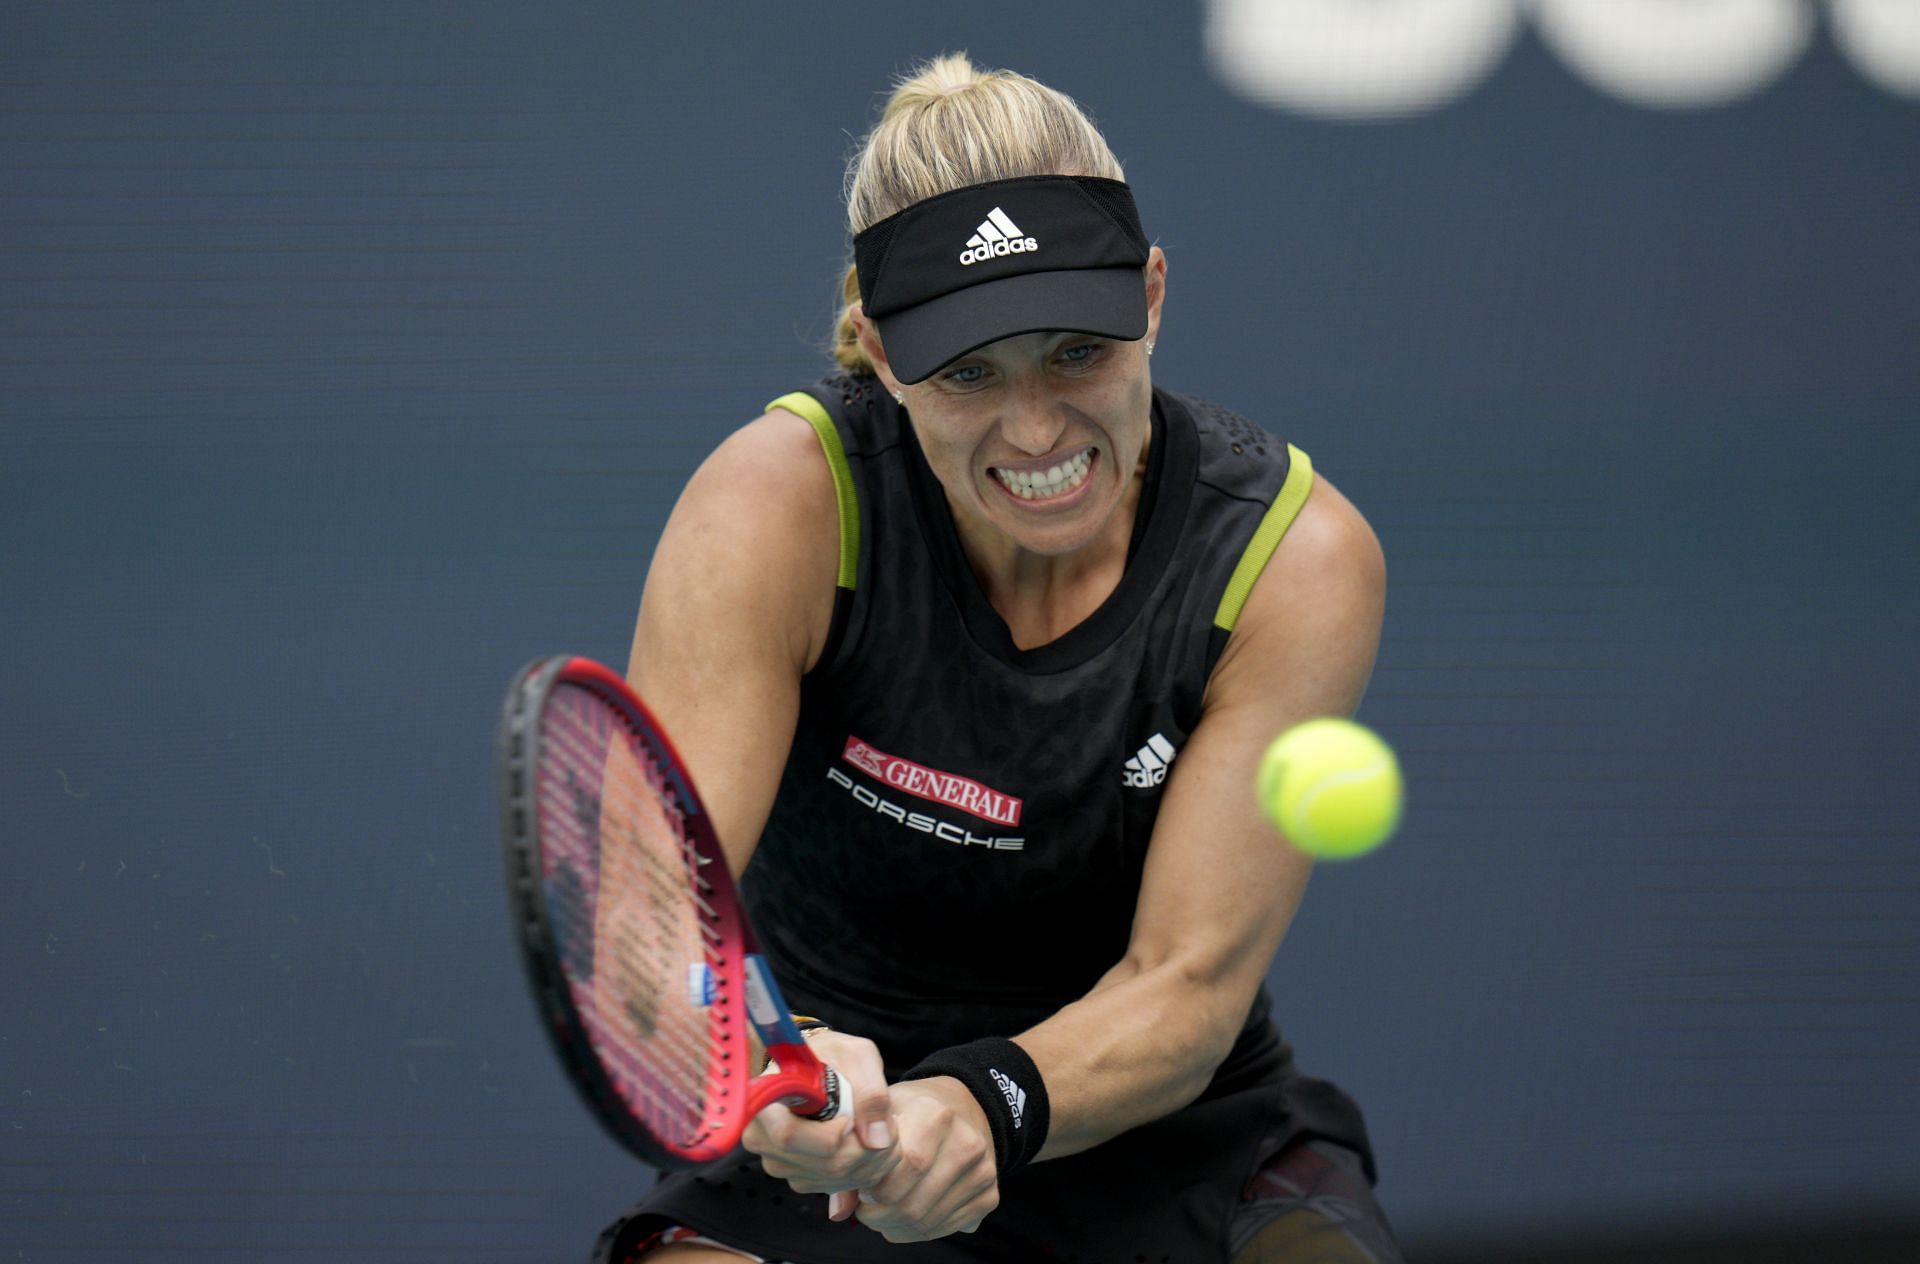 Angelique Kerber plays a return to Naomi Osaka at the Miami Open